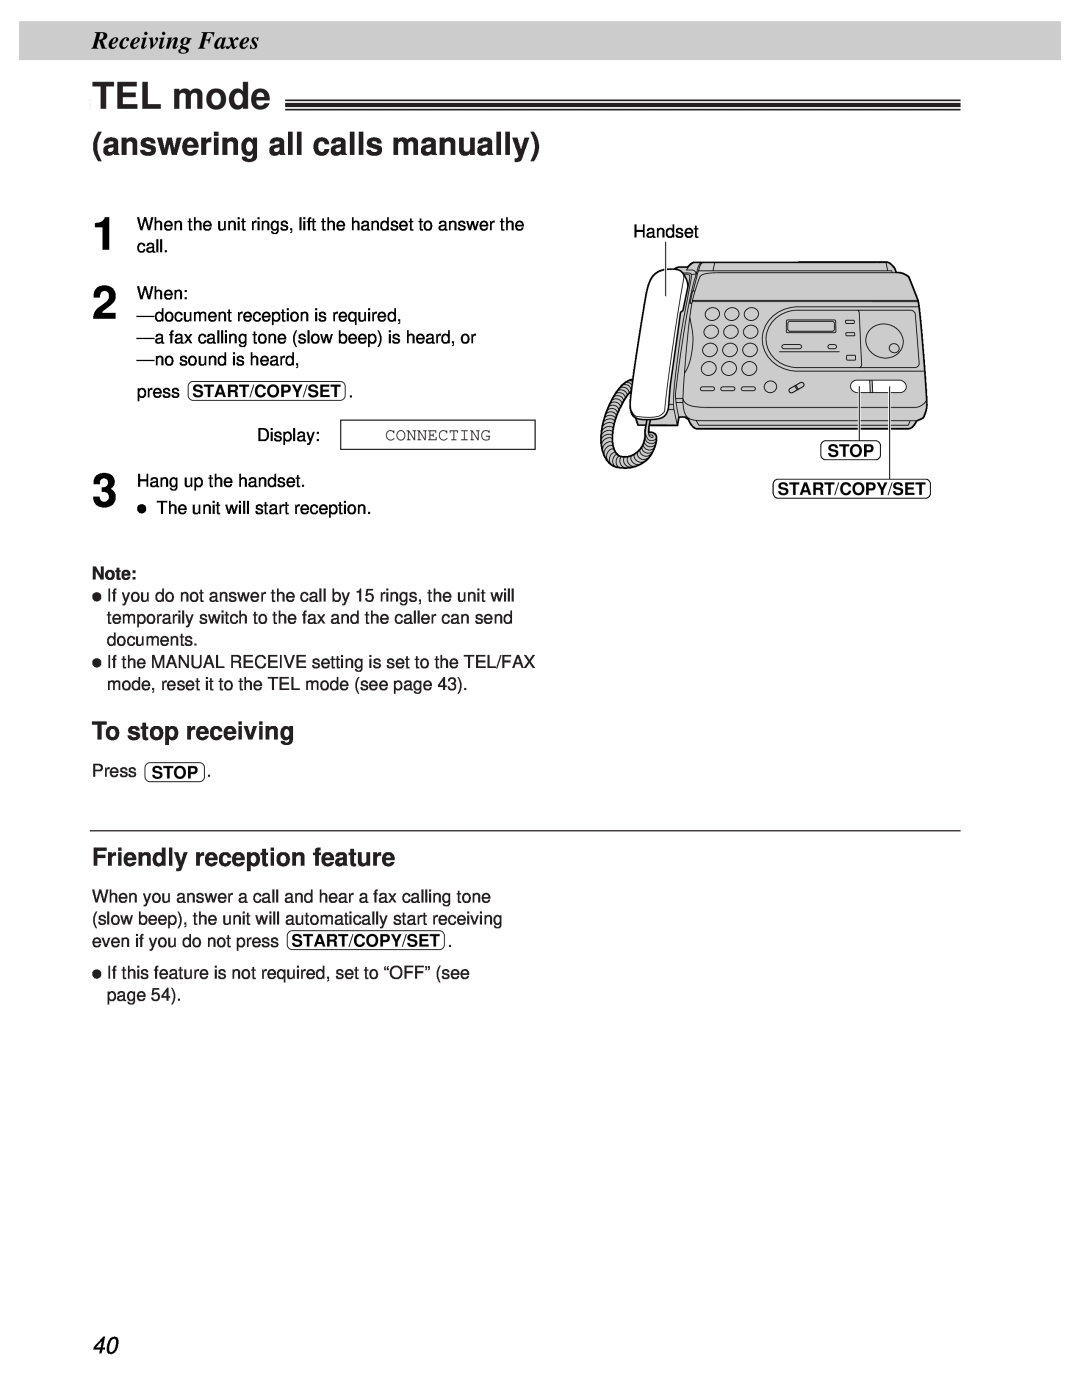 Panasonic KX-FT31BX TEL mode, answering all calls manually, To stop receiving, Friendly reception feature, Receiving Faxes 